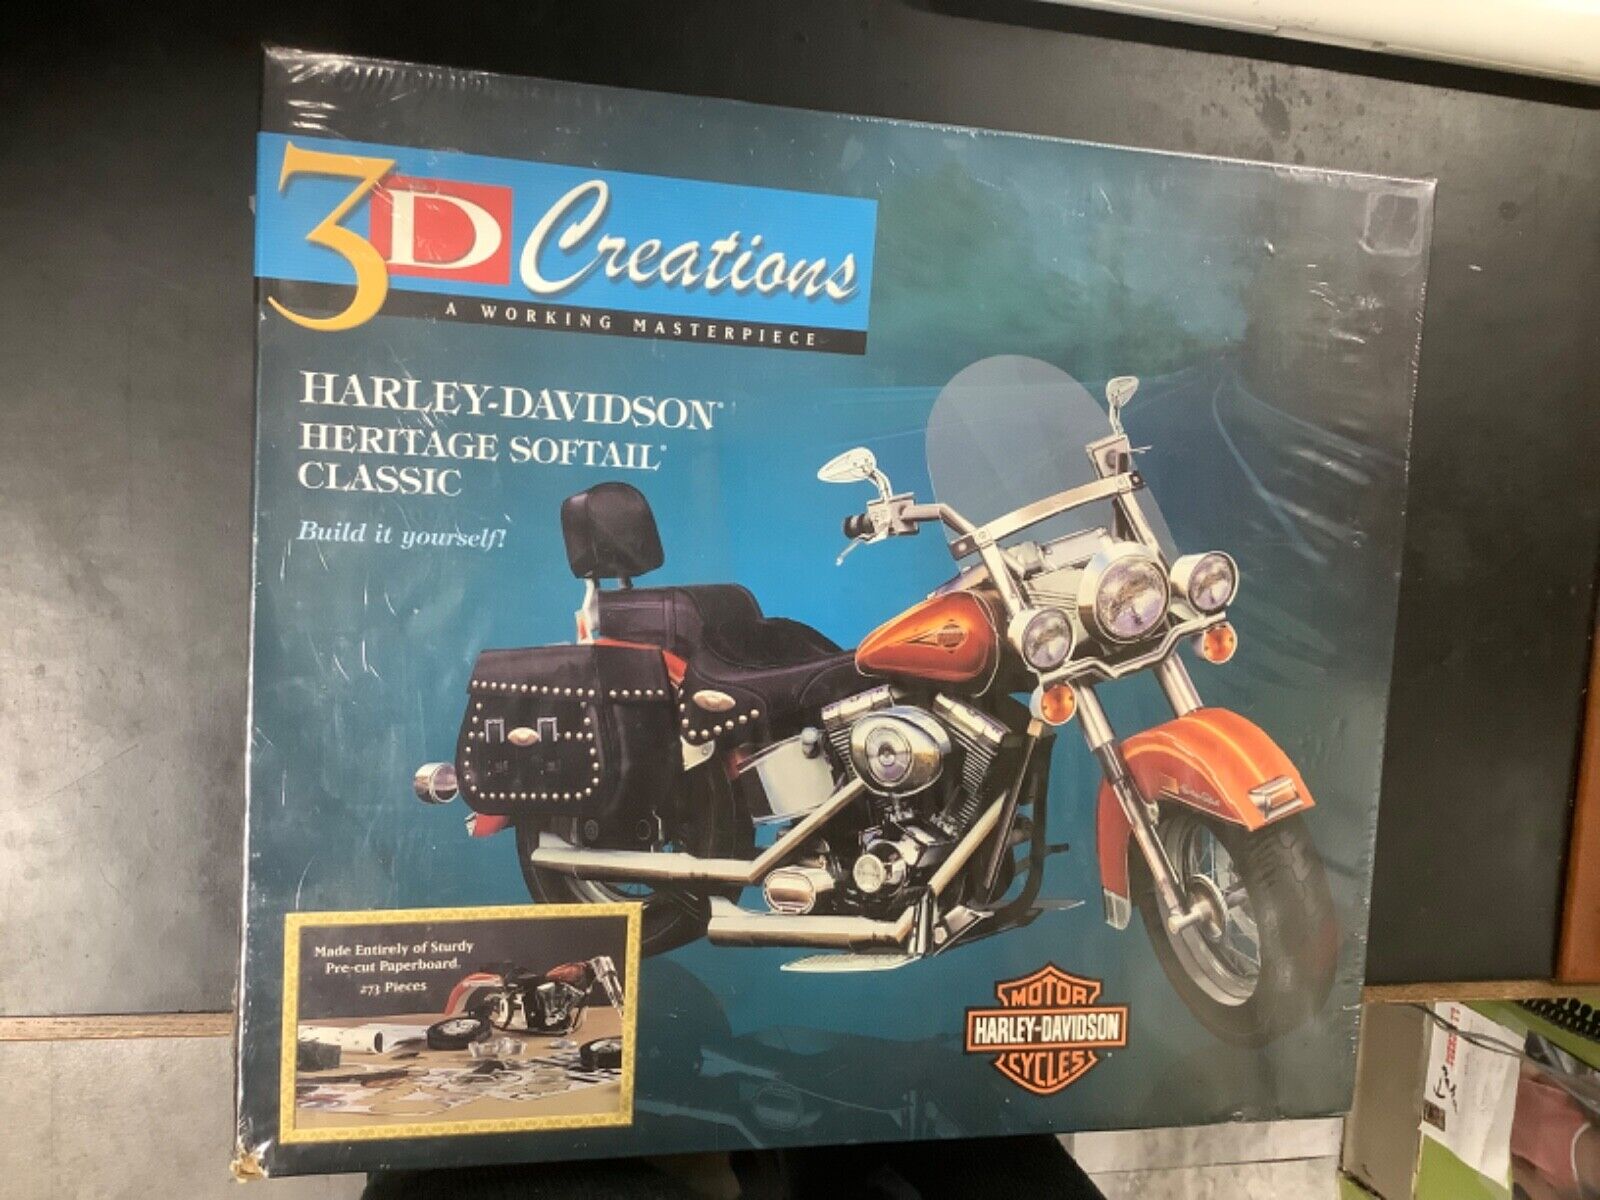 3d creations harley davidson heritage softail classic - sealed but preowned